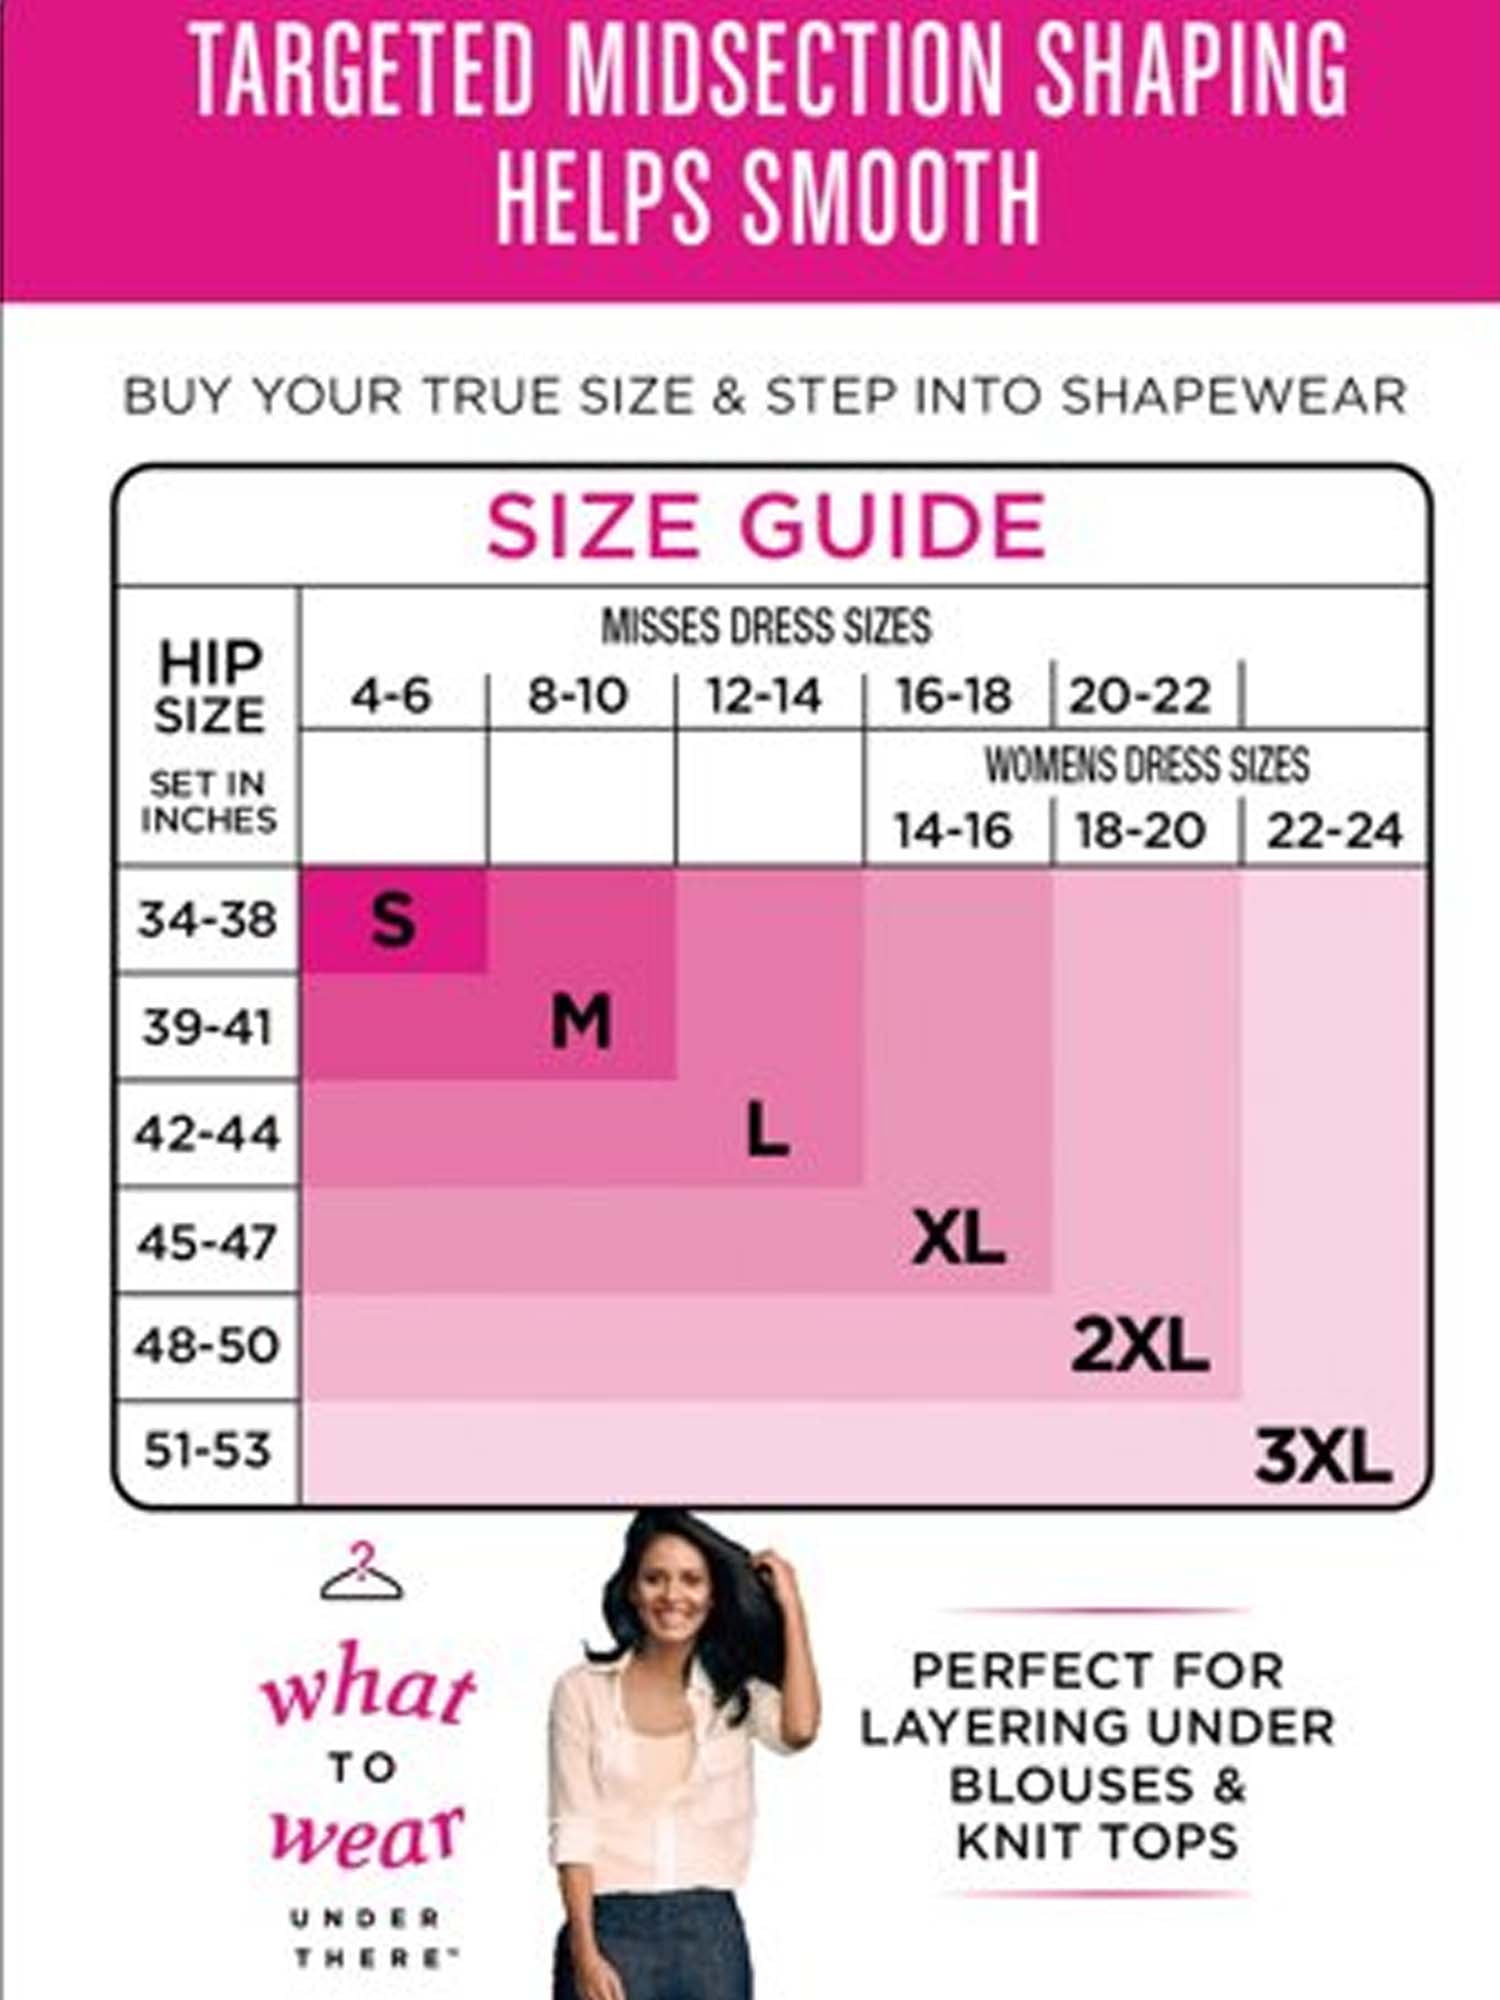 Maidenform Flexees Women's Tame Your Tummy Firm Shaping